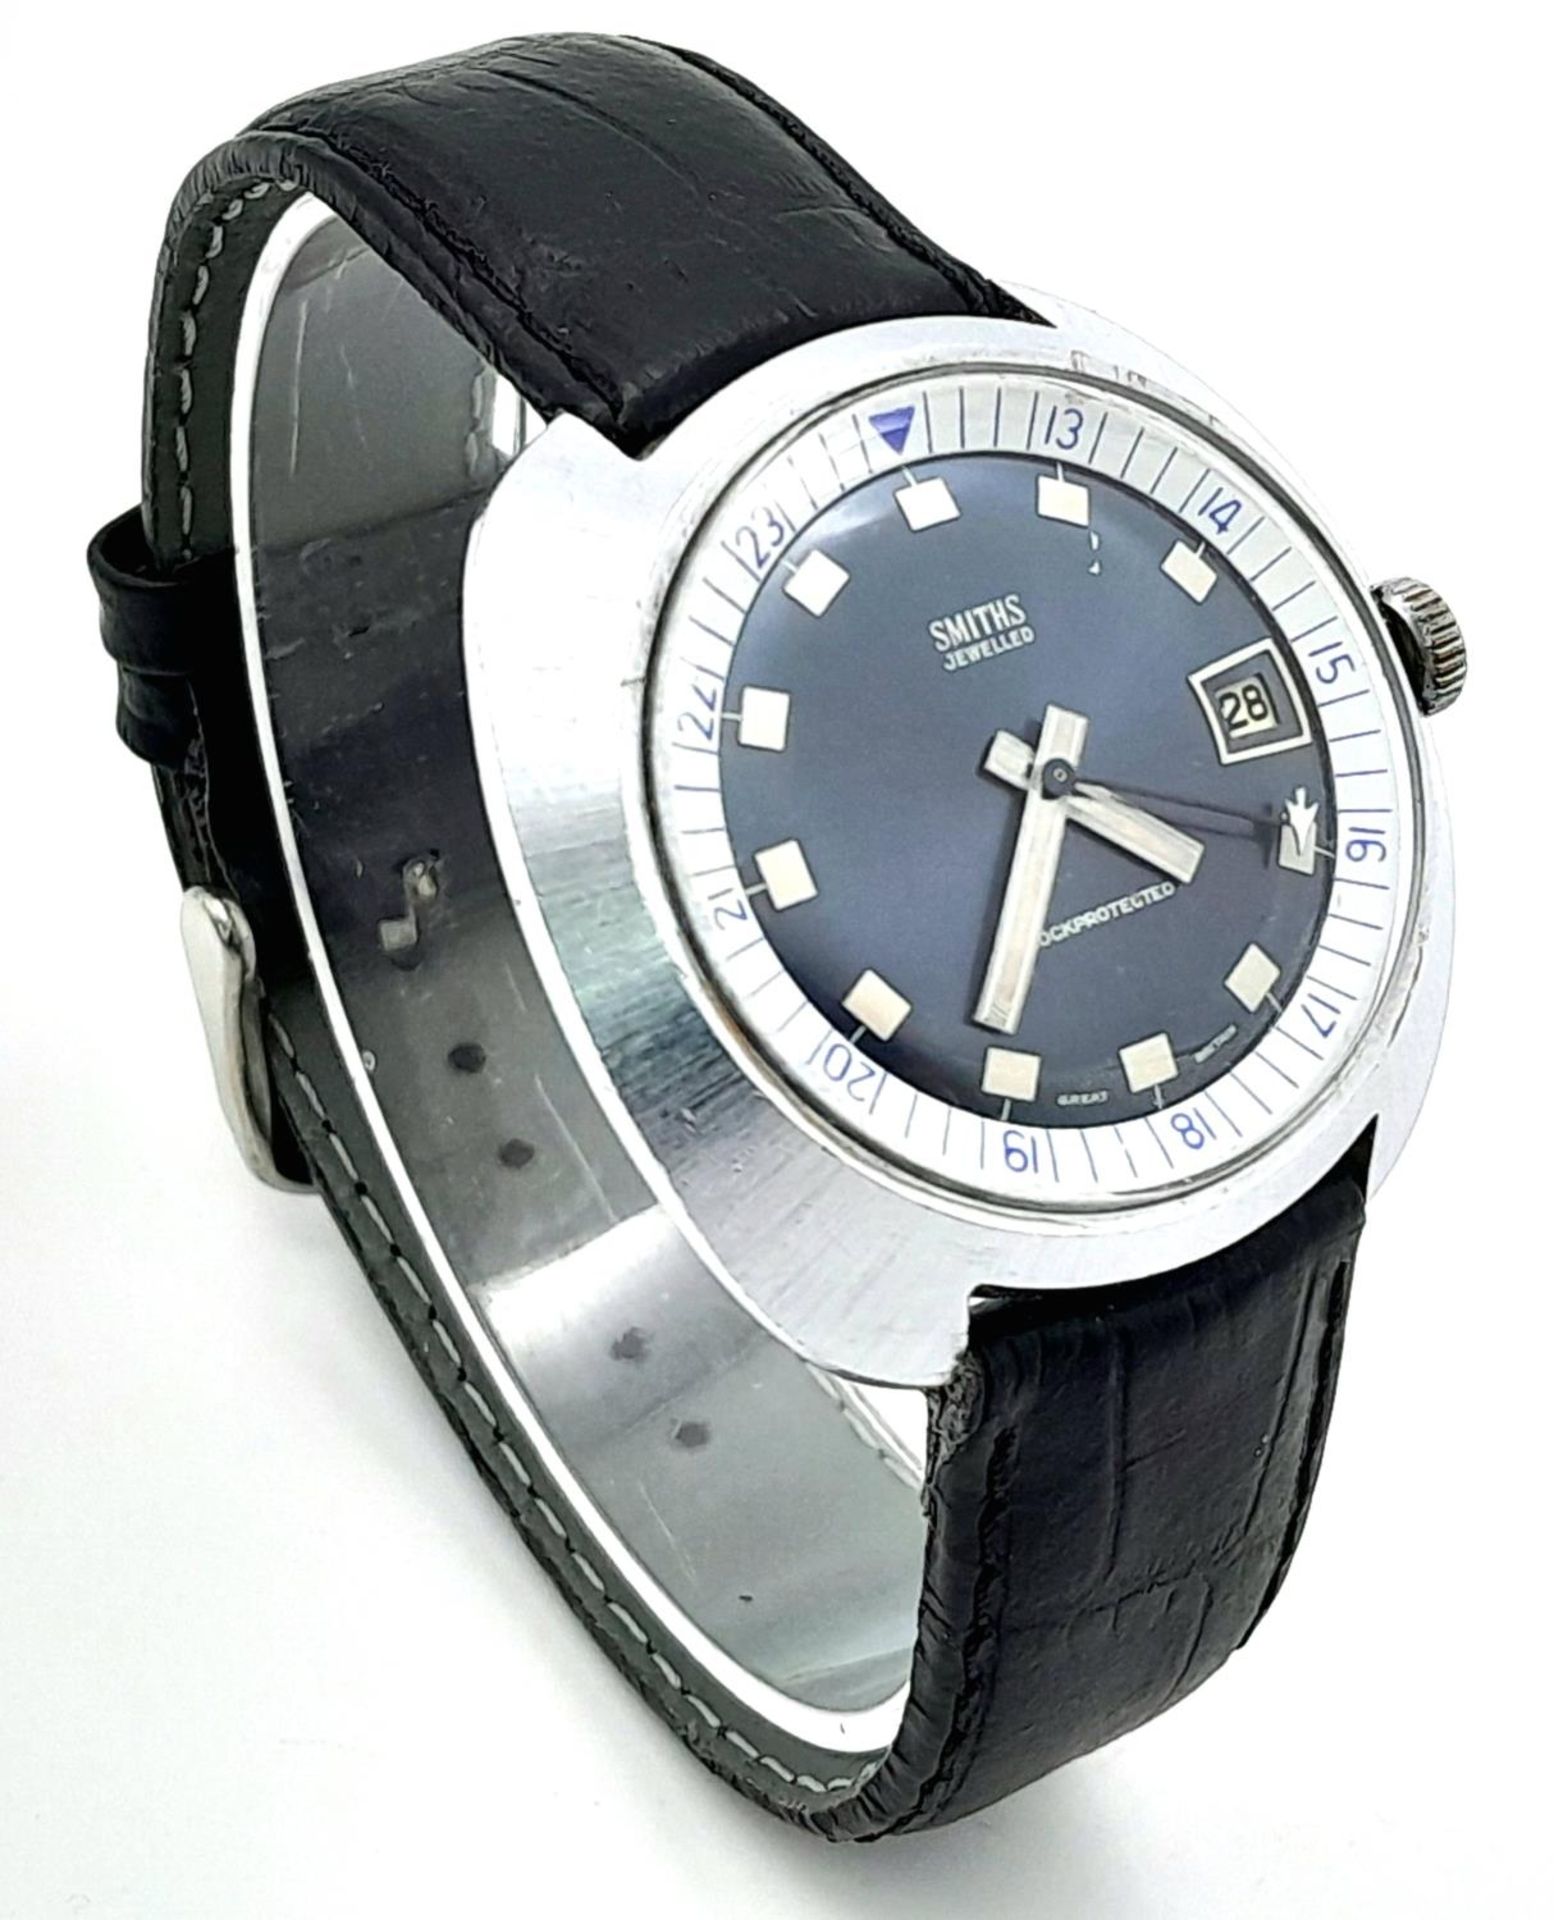 A Vintage Smiths Mechanical Gents Watch. Black leather strap. Stainless steel case - 42mm. Blue dial - Bild 3 aus 6